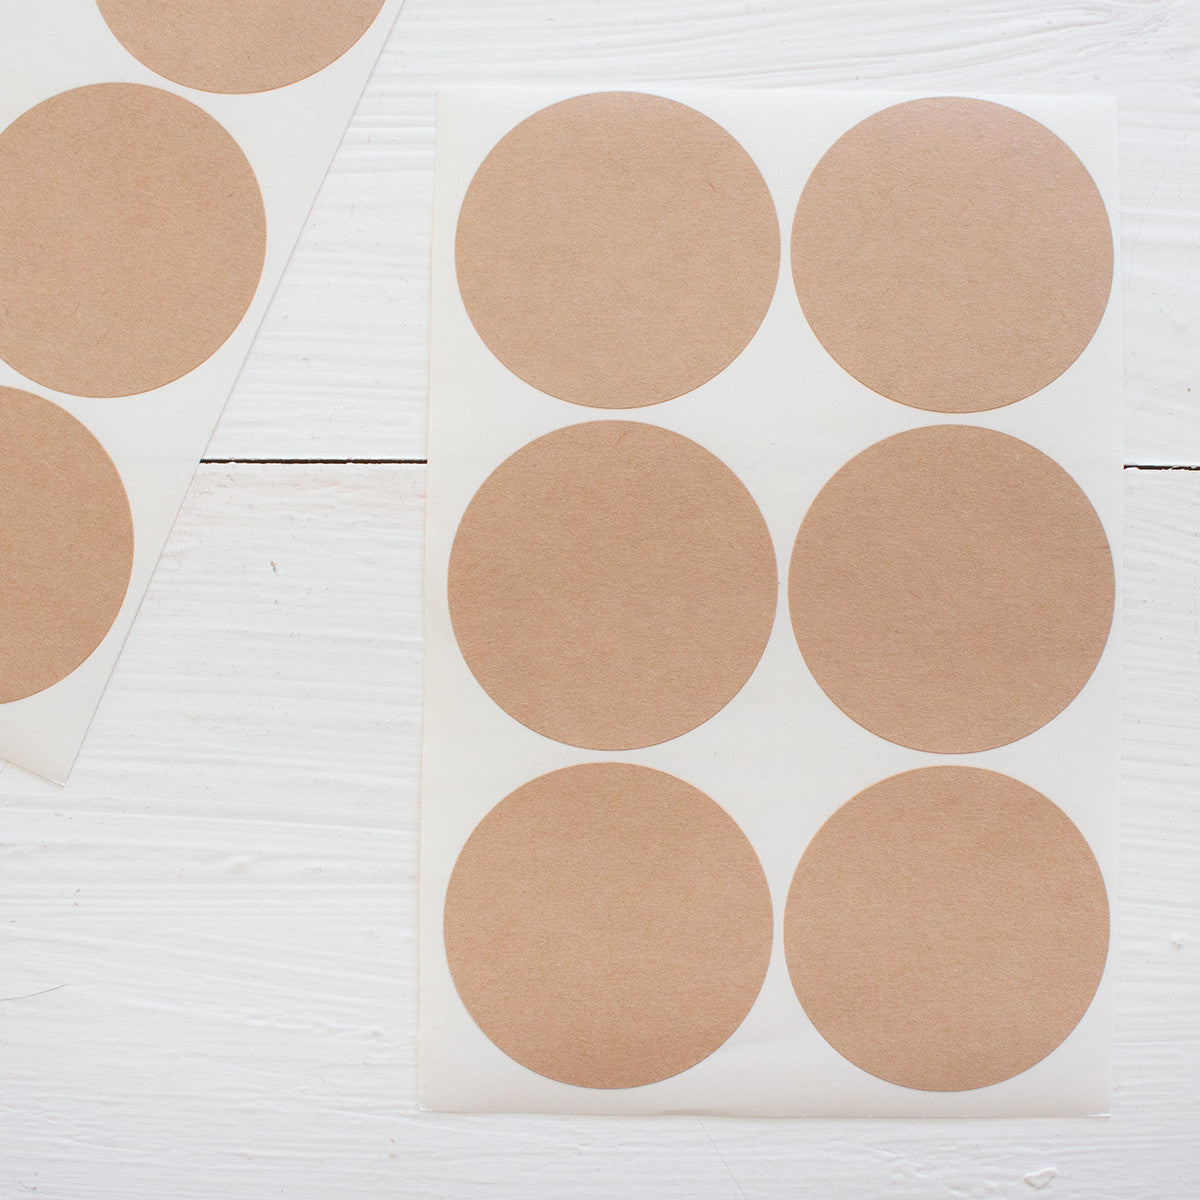 2 inch circle stickers - blanks